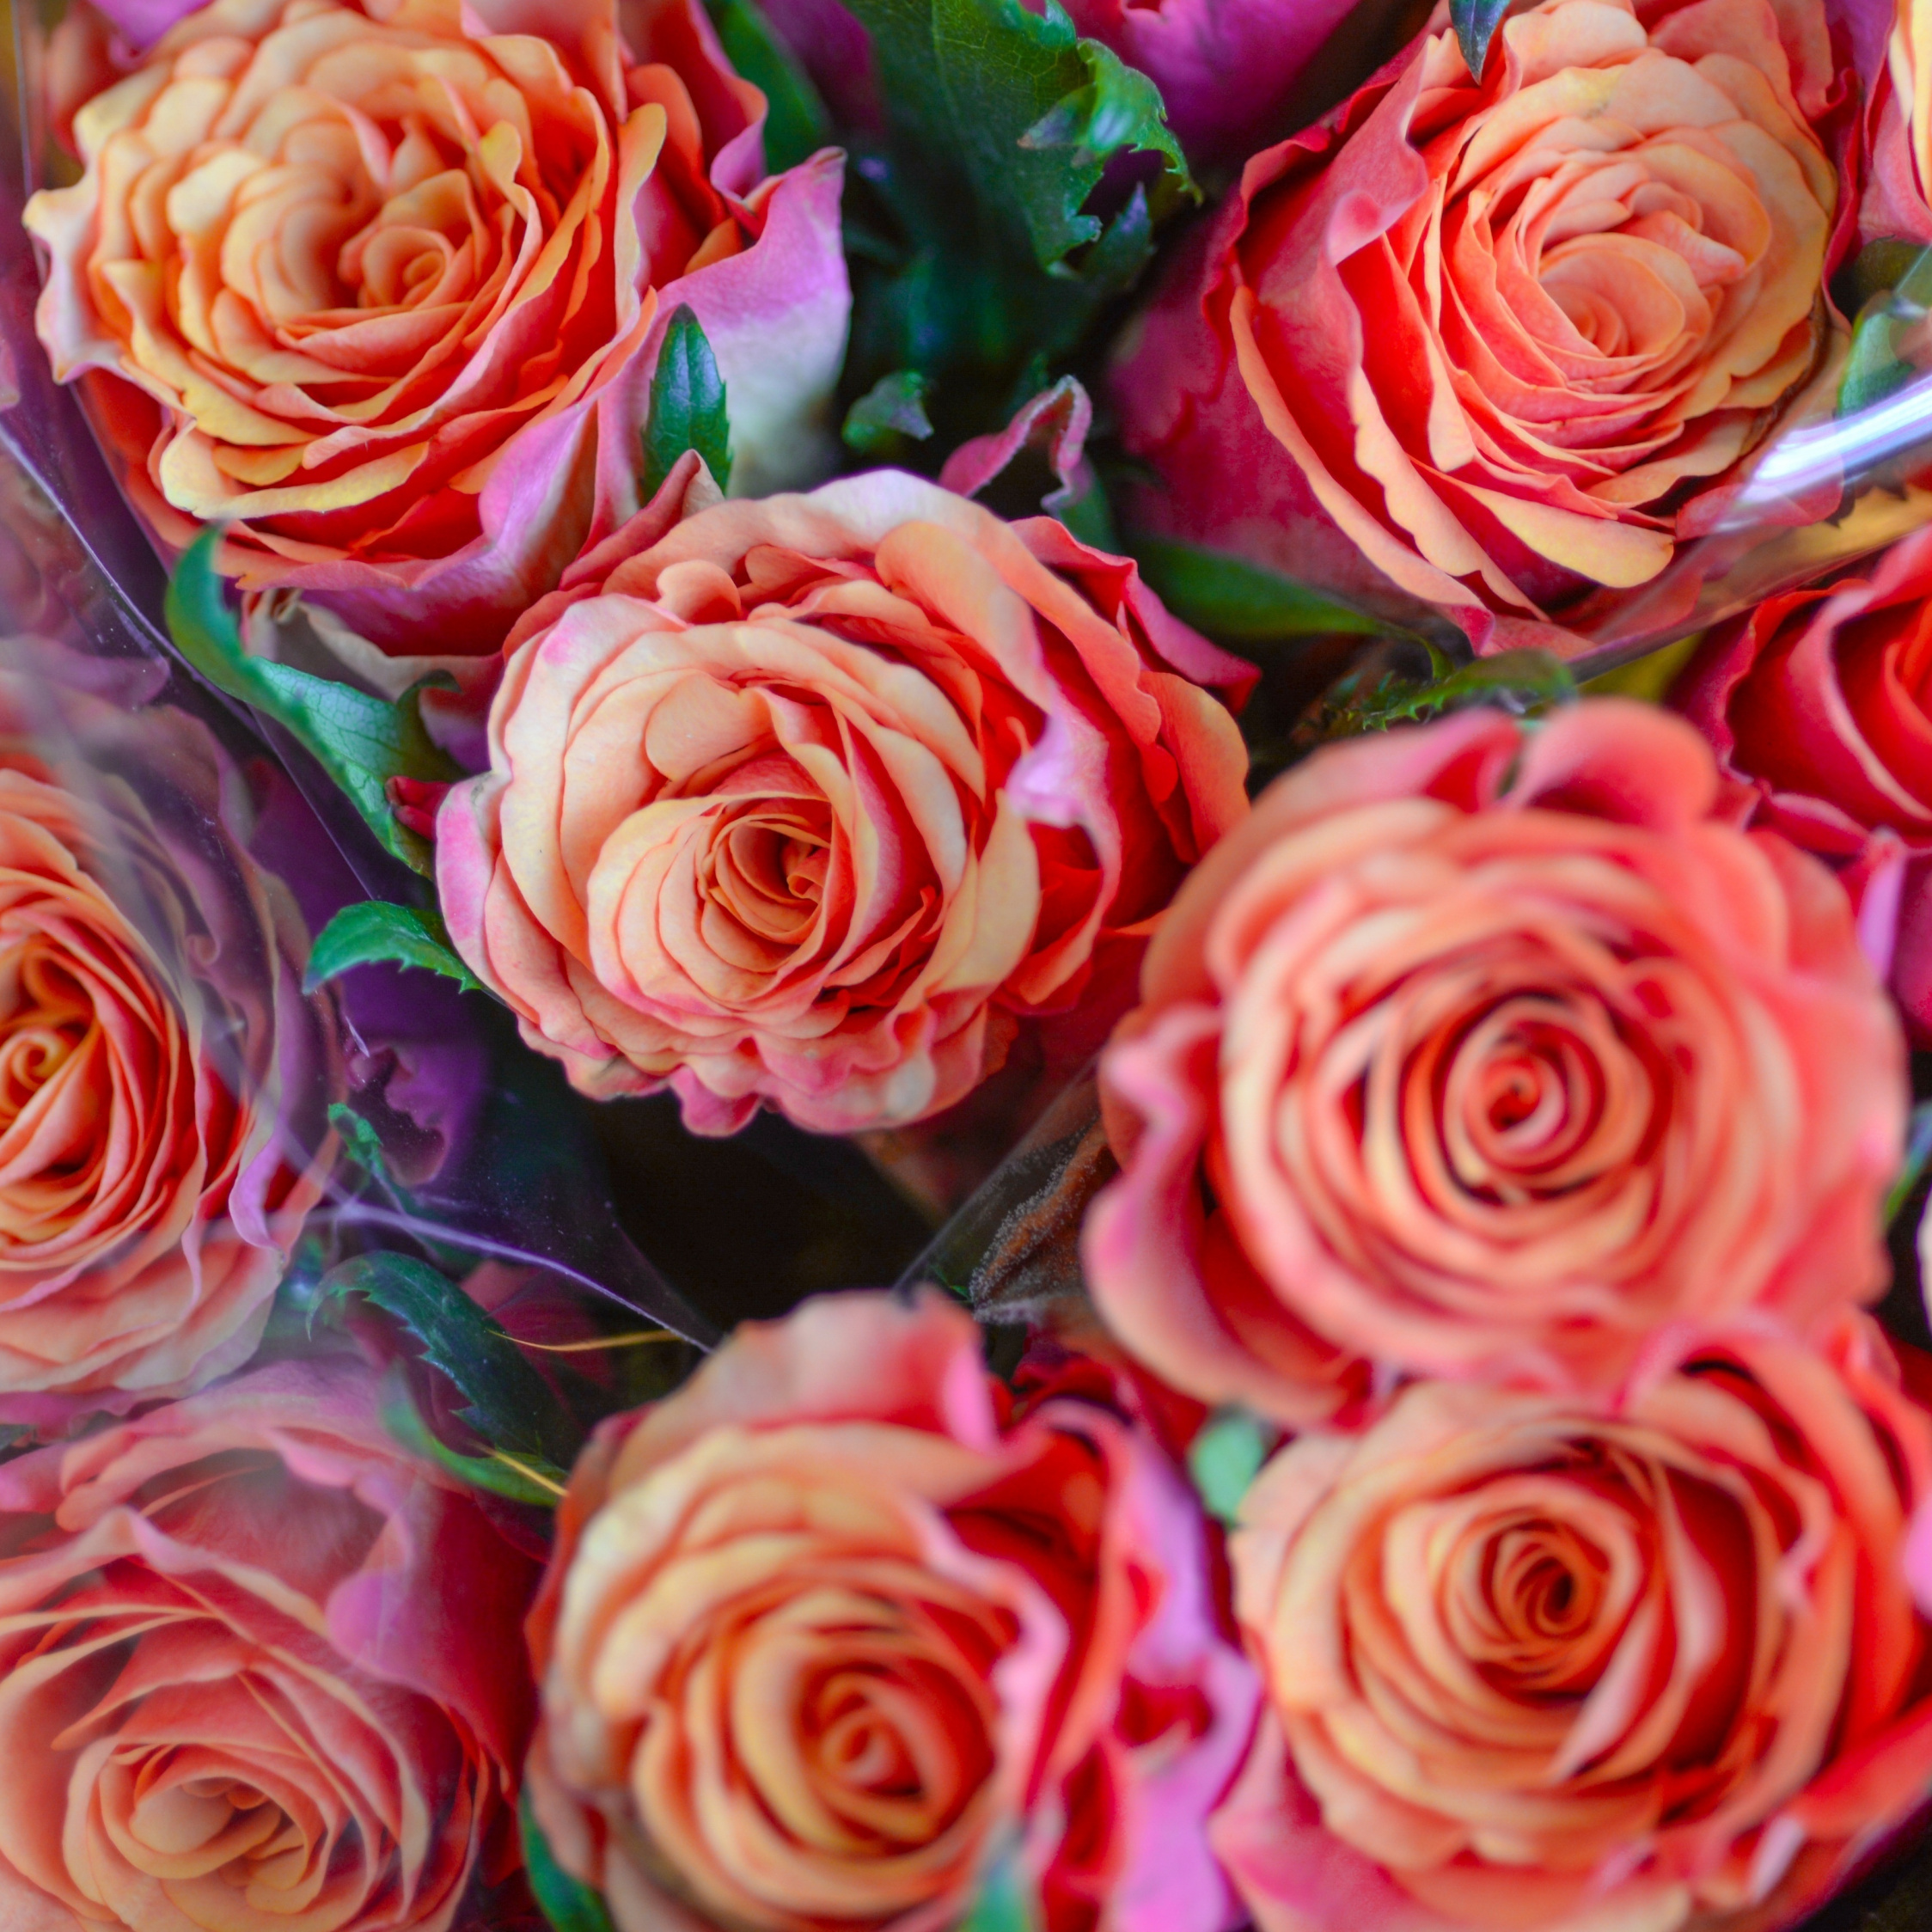 Bouquet, Red Roses, Flowers, Gift, Wallpaper - 9 August National Women's Day South Africa - HD Wallpaper 